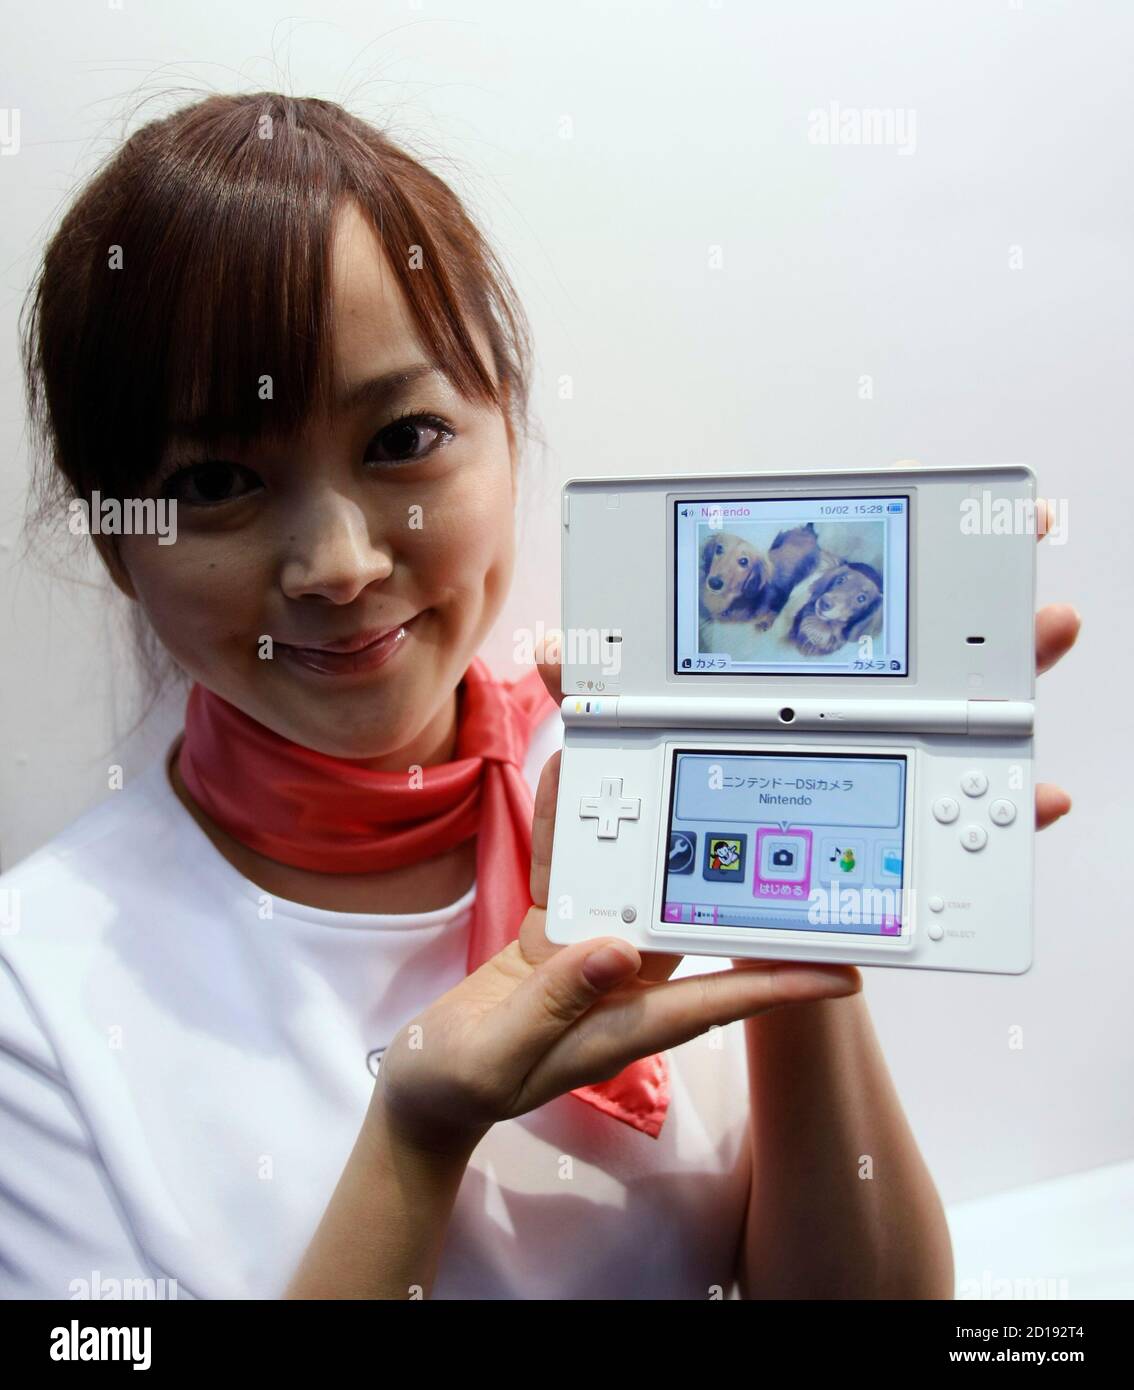 A promoter for Nintendo Co Ltd poses with the new DS handheld game console  after a news conference in Tokyo October 2, 2008. Japanese video game maker  Nintendo said on Thursday it